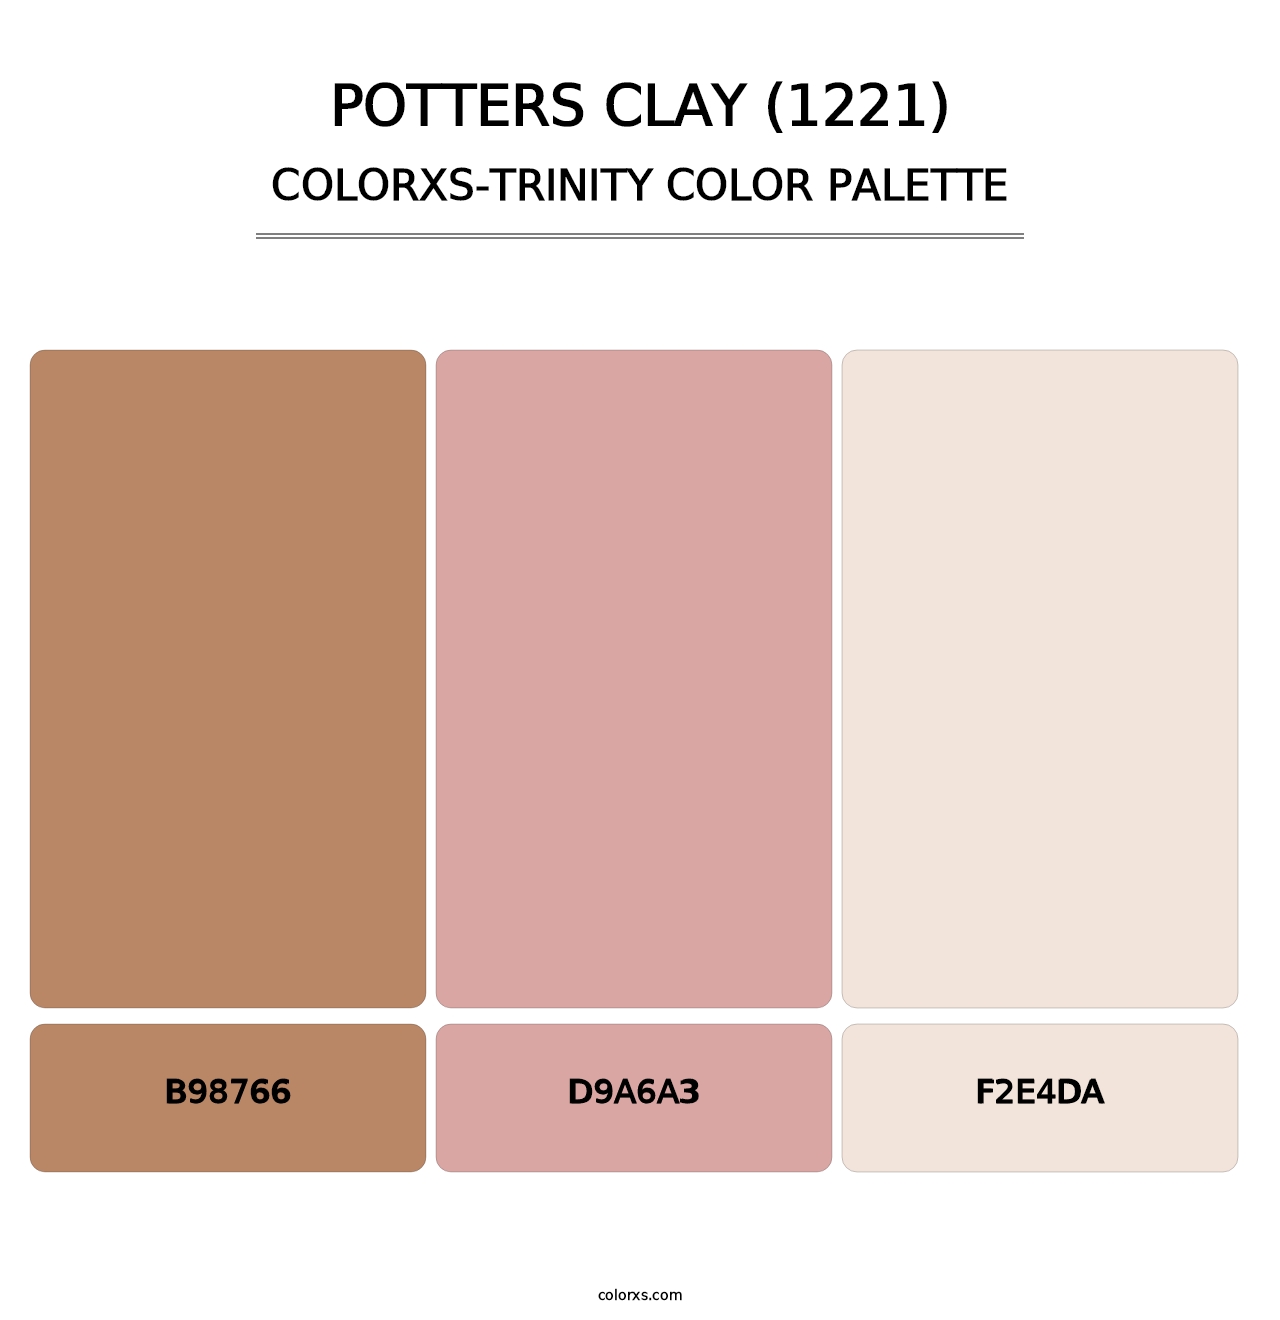 Potters Clay (1221) - Colorxs Trinity Palette